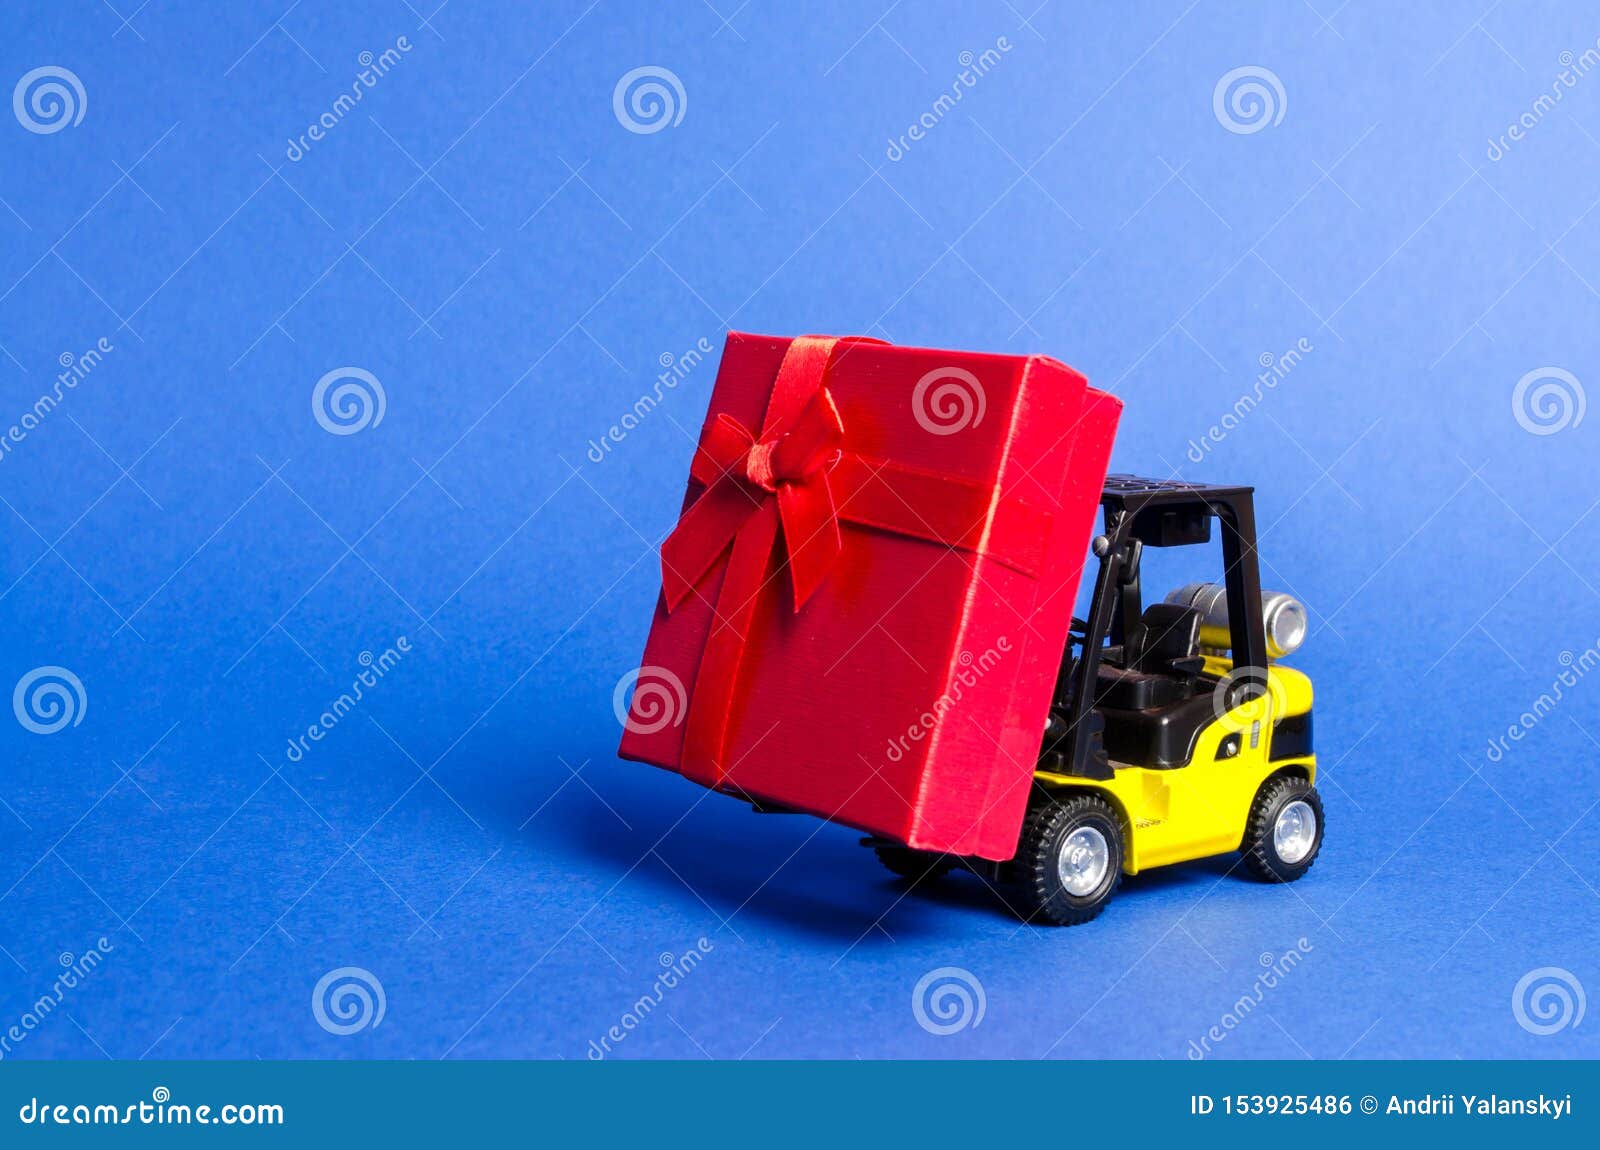 yellow forklift truck carries a red gift box with a bow. purchase and delivery of a present. retail, discounts and contests.